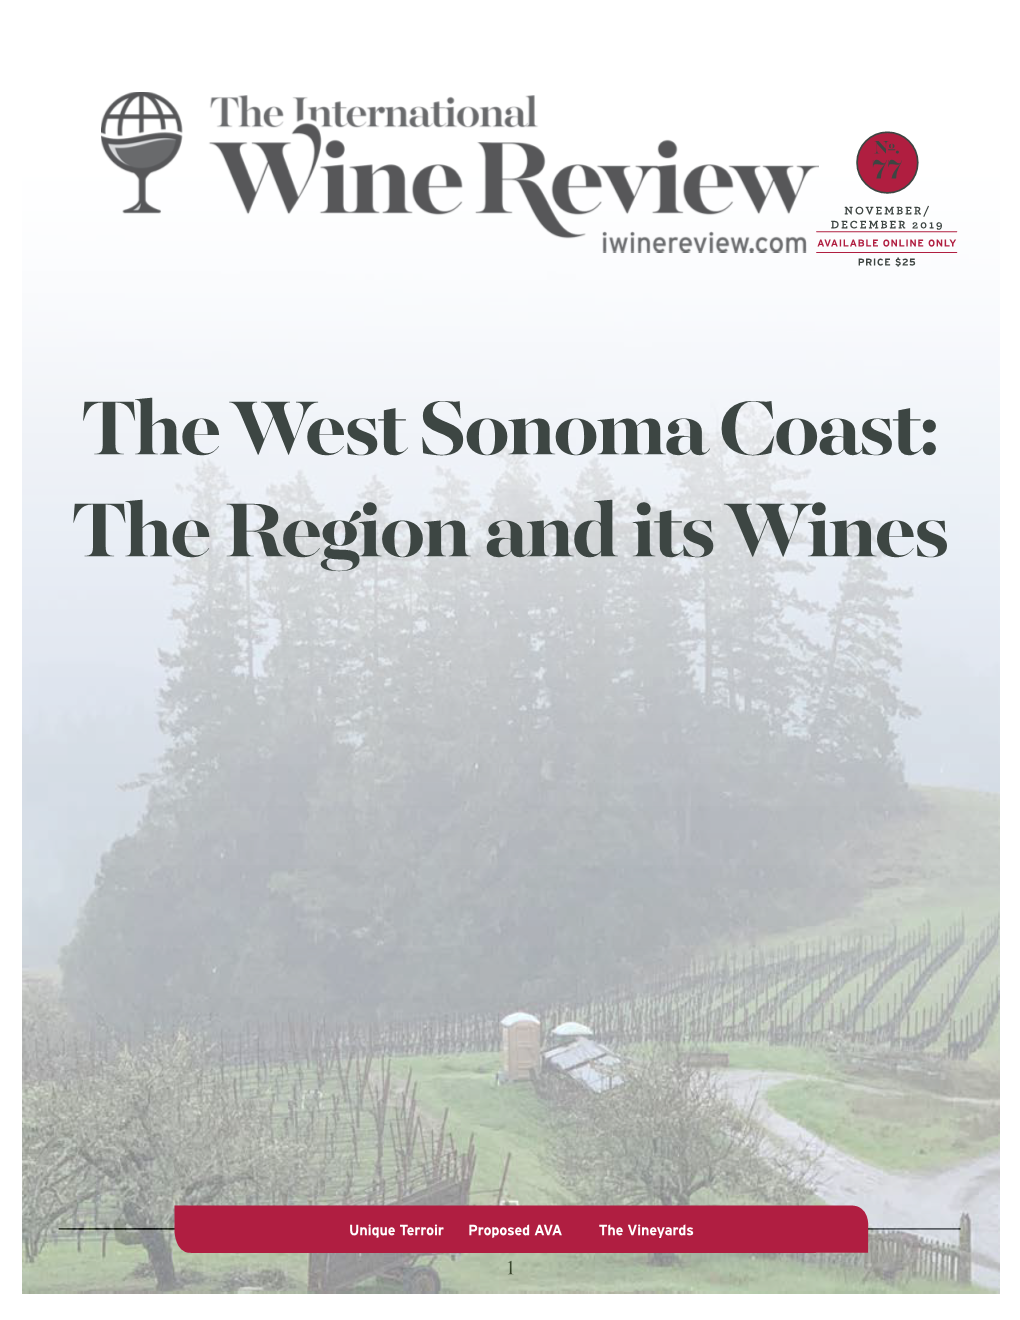 The West Sonoma Coast: the Region and Its Wines